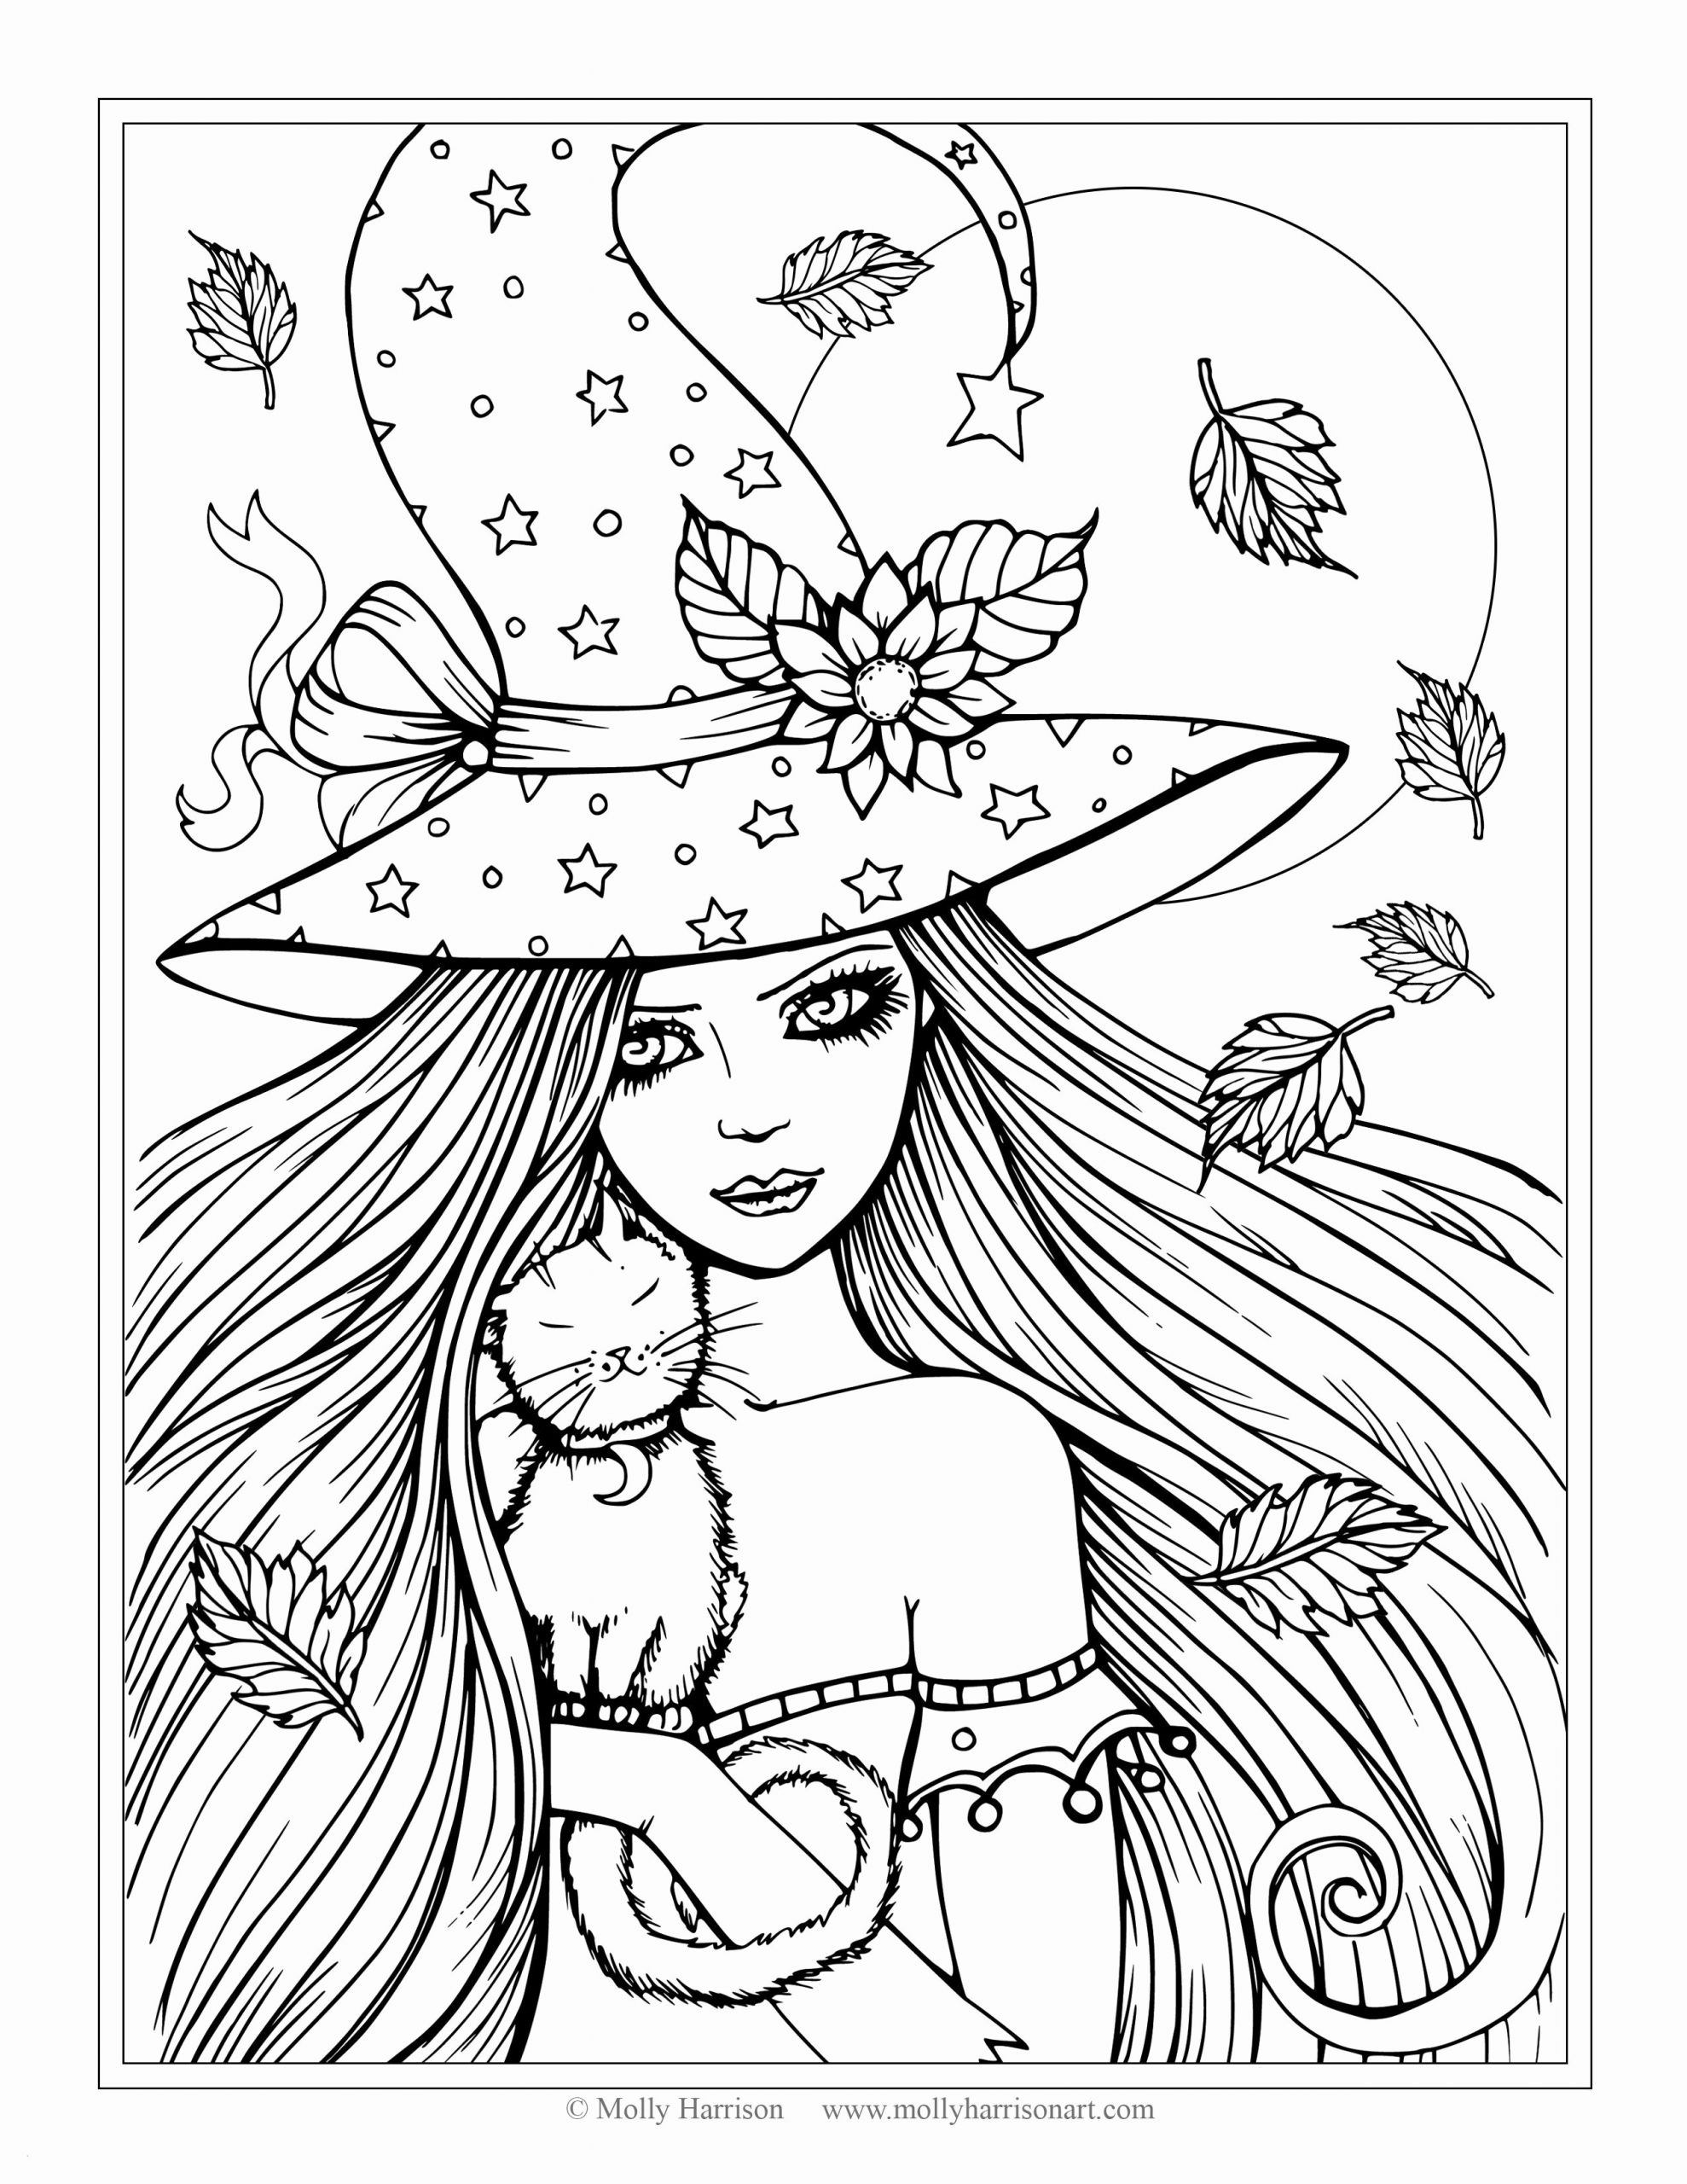 Therapeutic Coloring Pages For Kids
 24 therapeutic Coloring Pages for Kids Collection